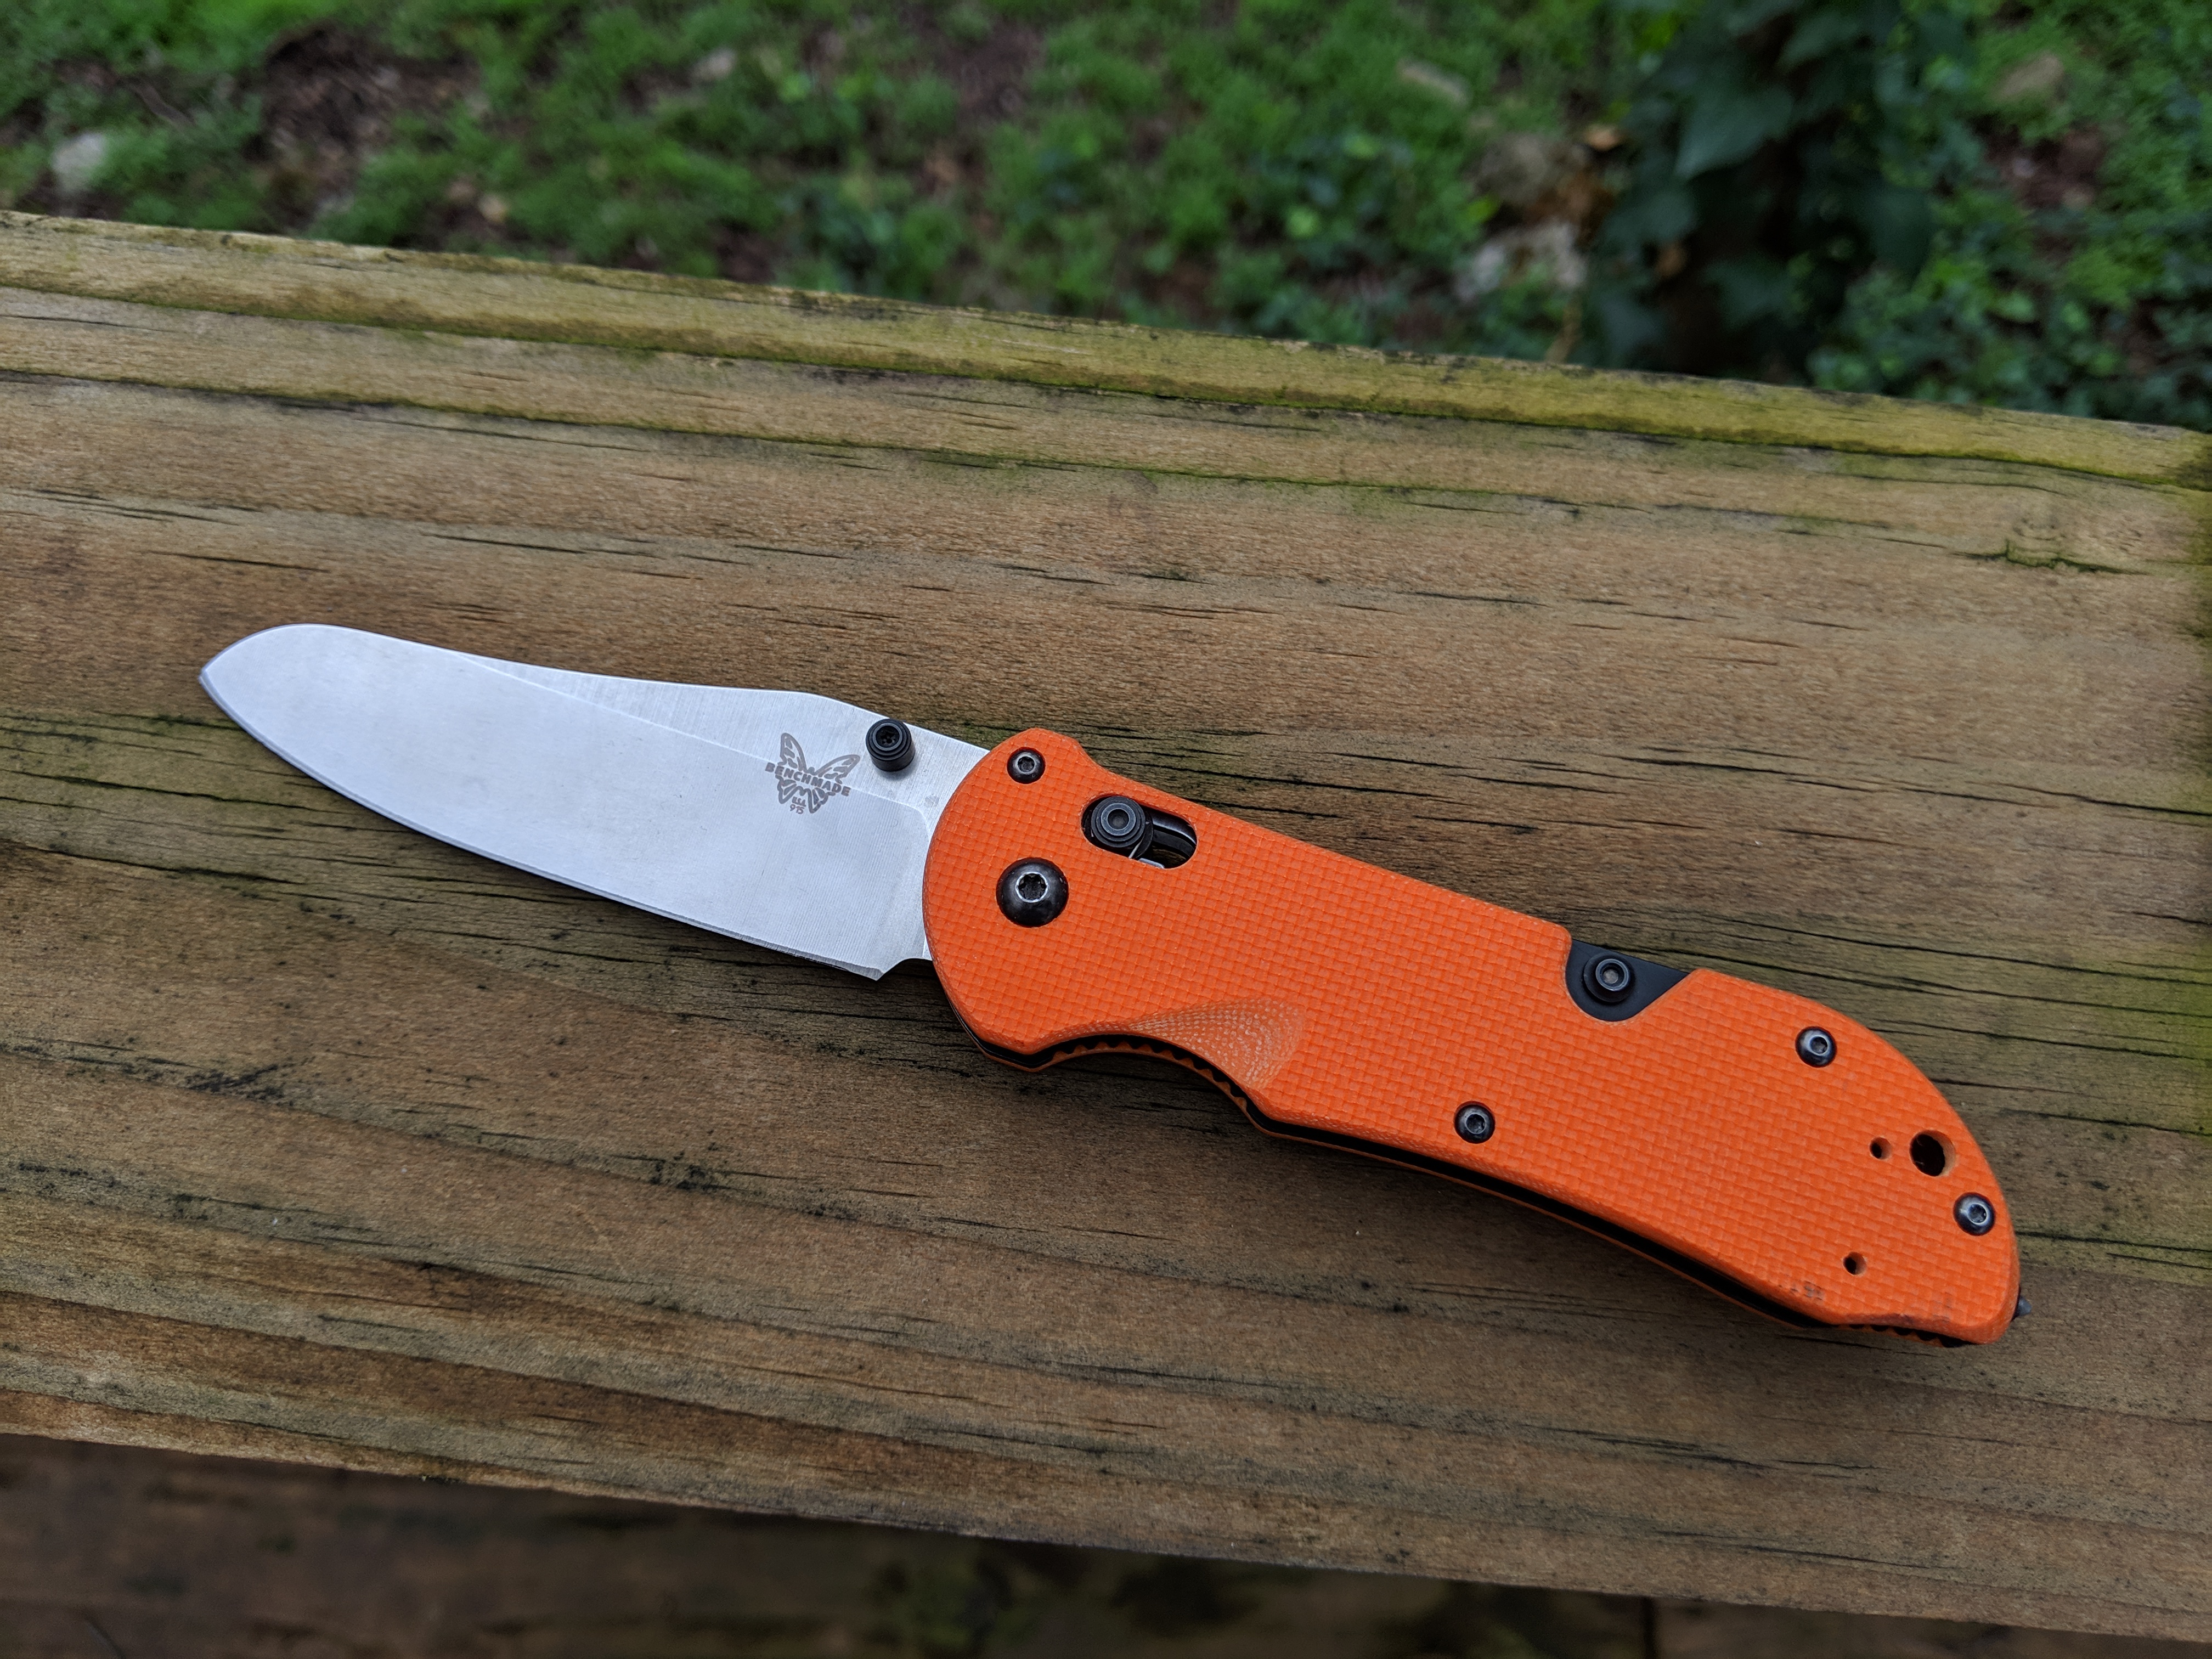 Thoughts on Benchmade cutlery? Specifically the Station Knife? : r